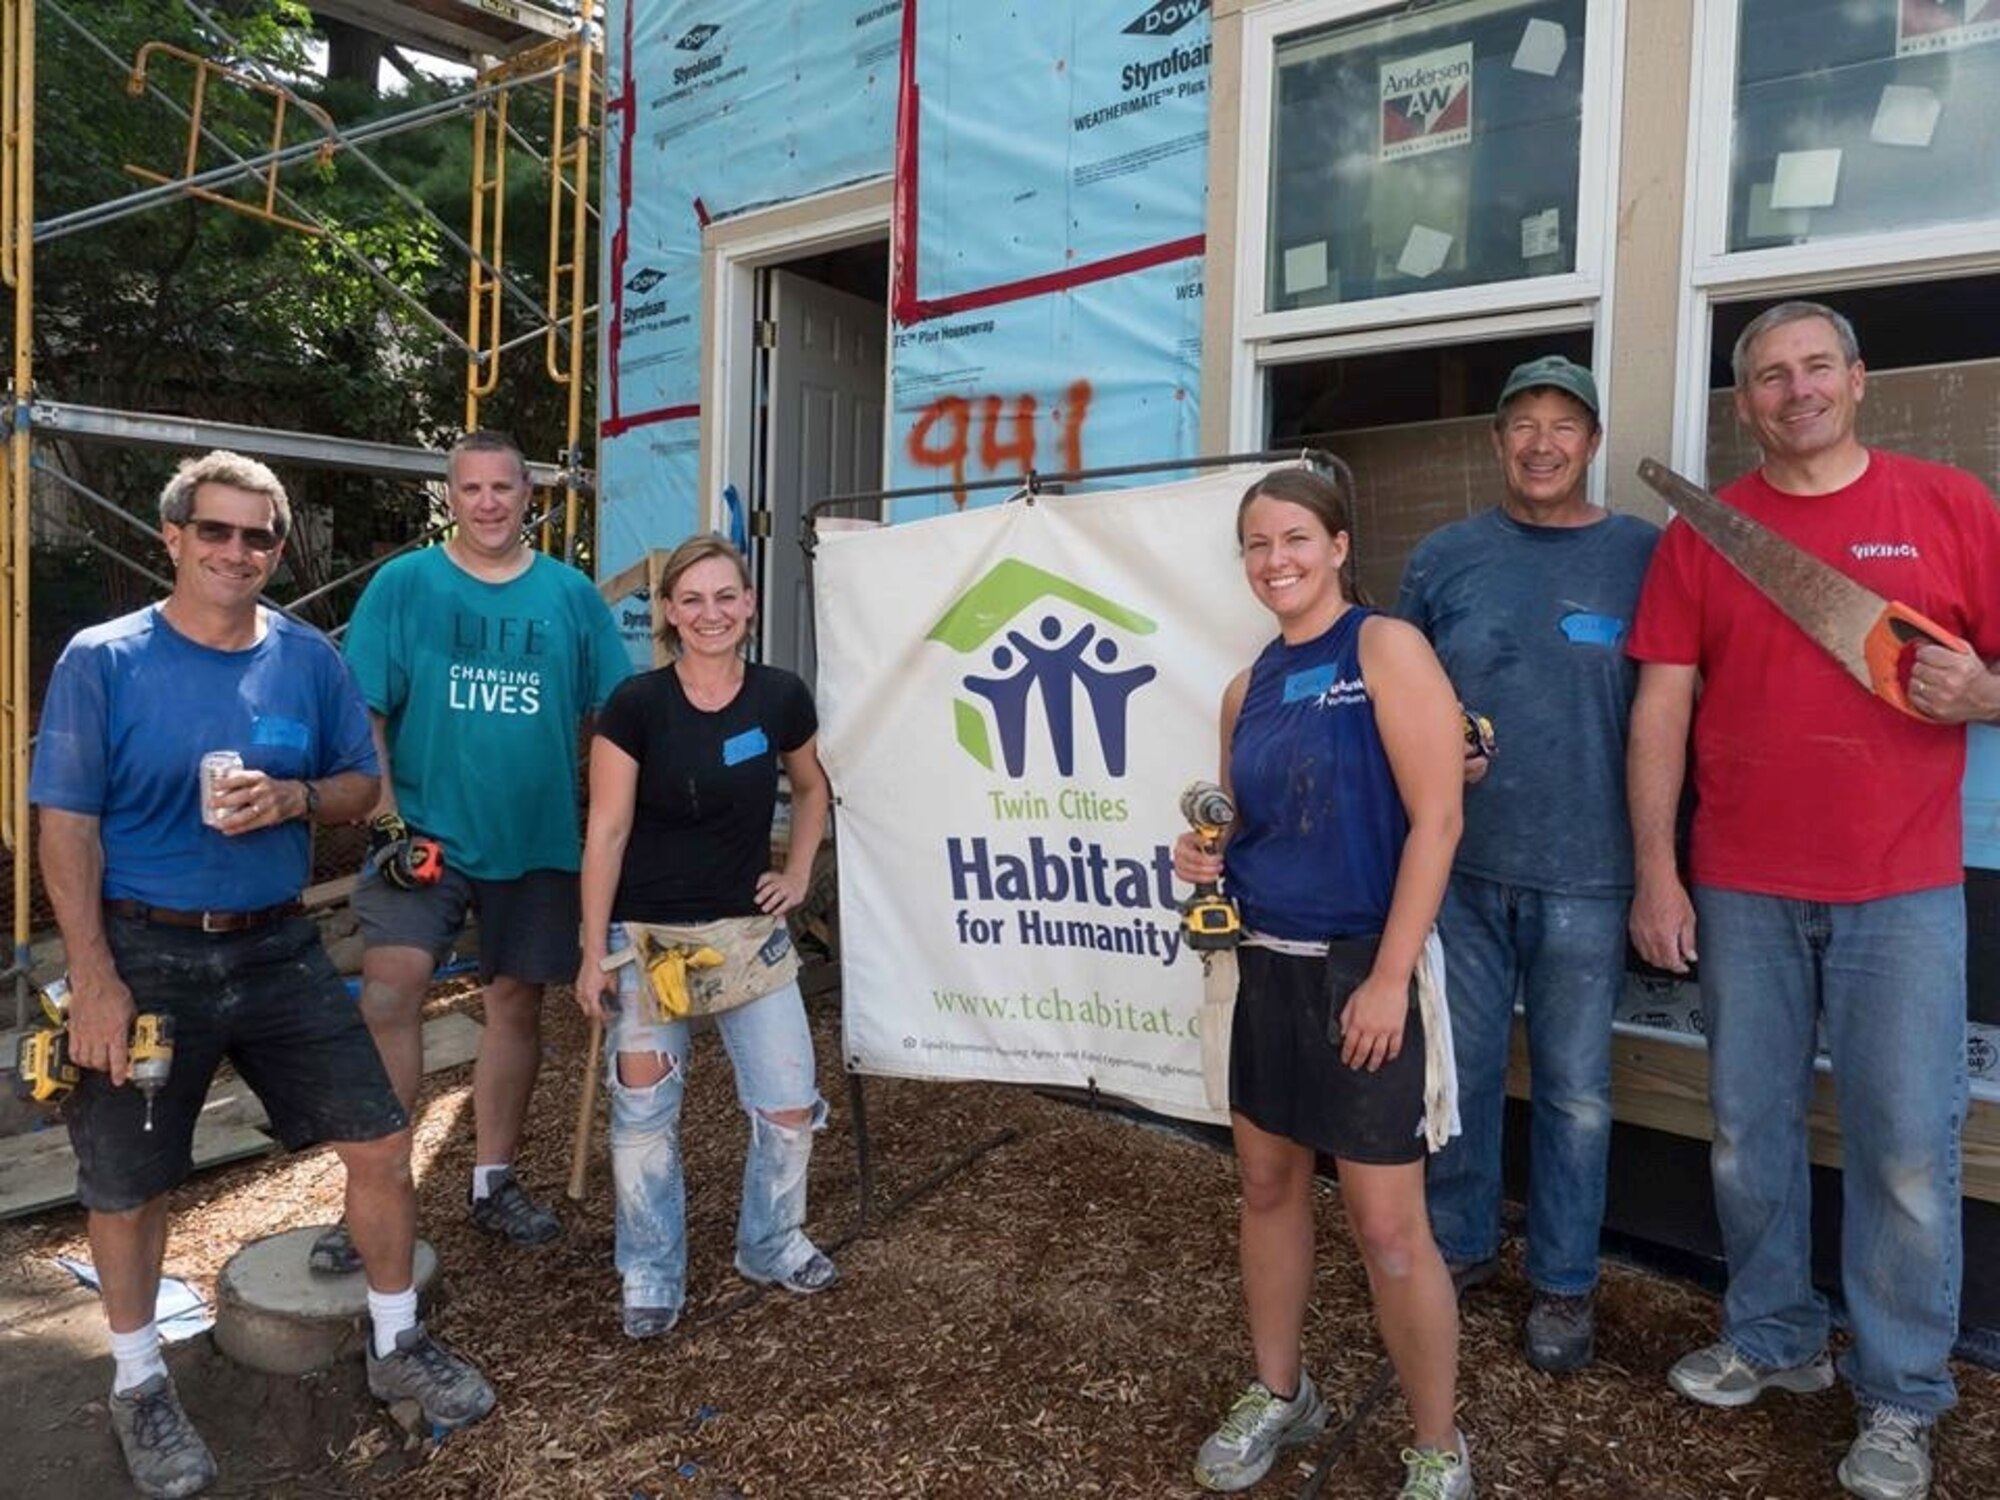 Global Vikings volunteer at Habitat for Humanity project in West St. Paul July 20. From left are Tom O'Reilly, Matt Welage, Master Sgt. Kelly Conley, Staff Sgt. Kayla Bowell, John Rudin and Col. Tim Wollmuth. (Air Force Photo/Paul Zadach)